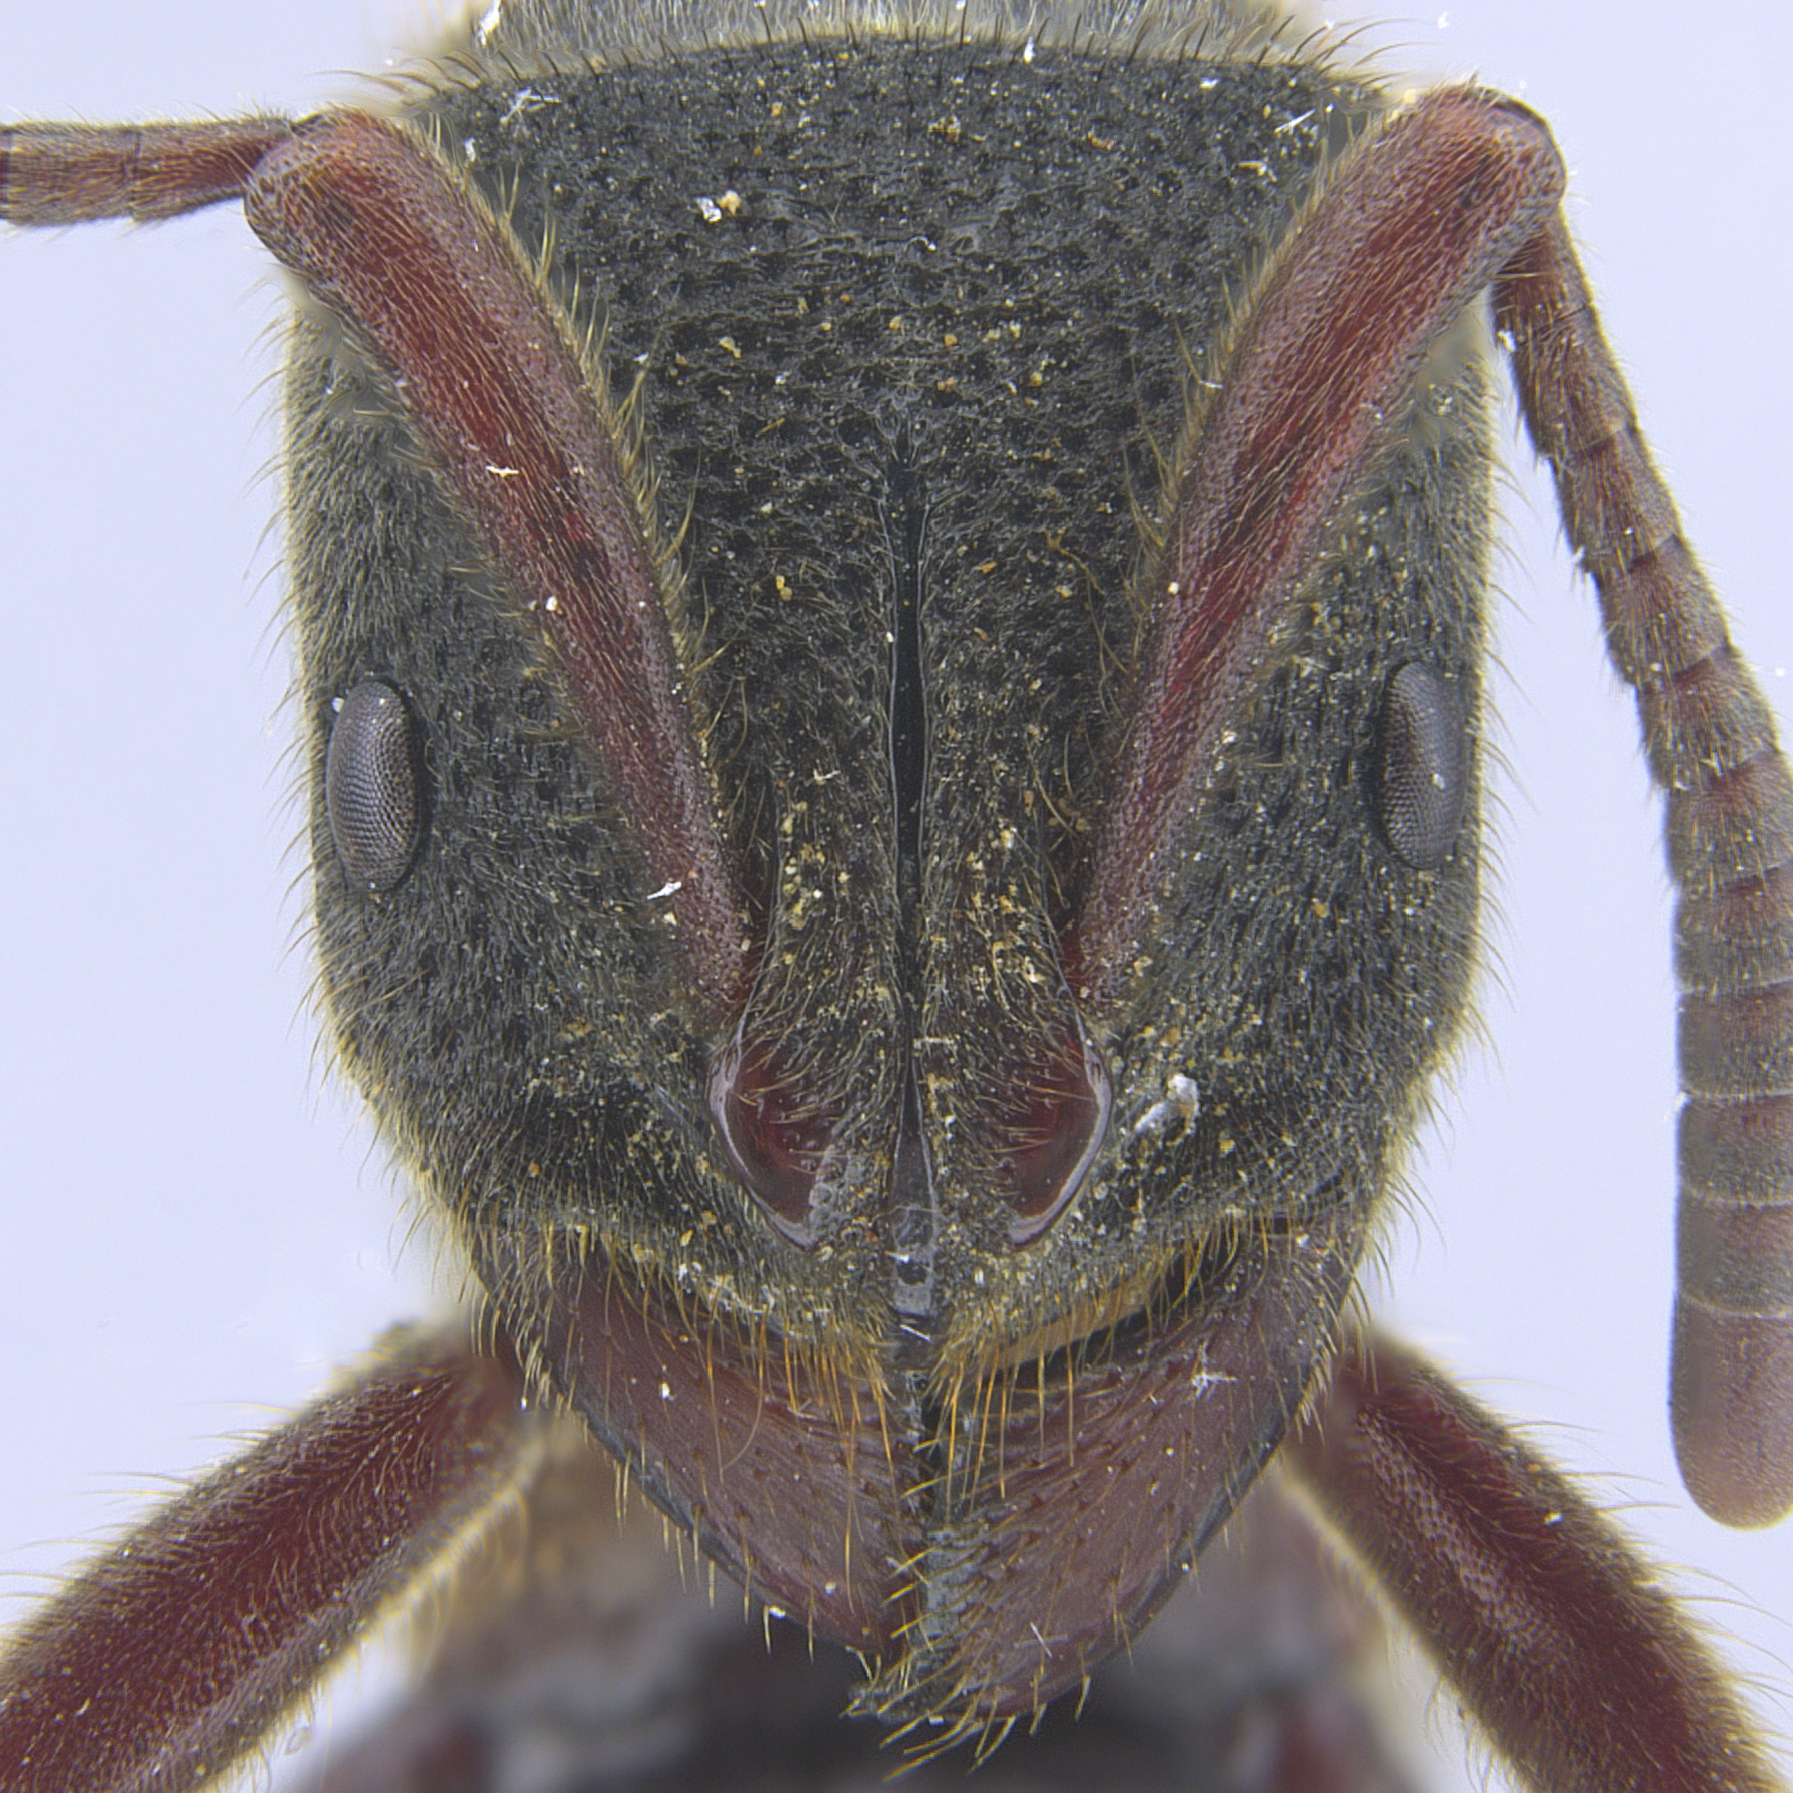 Full-face view 41 Pseudoneoponera rufipes